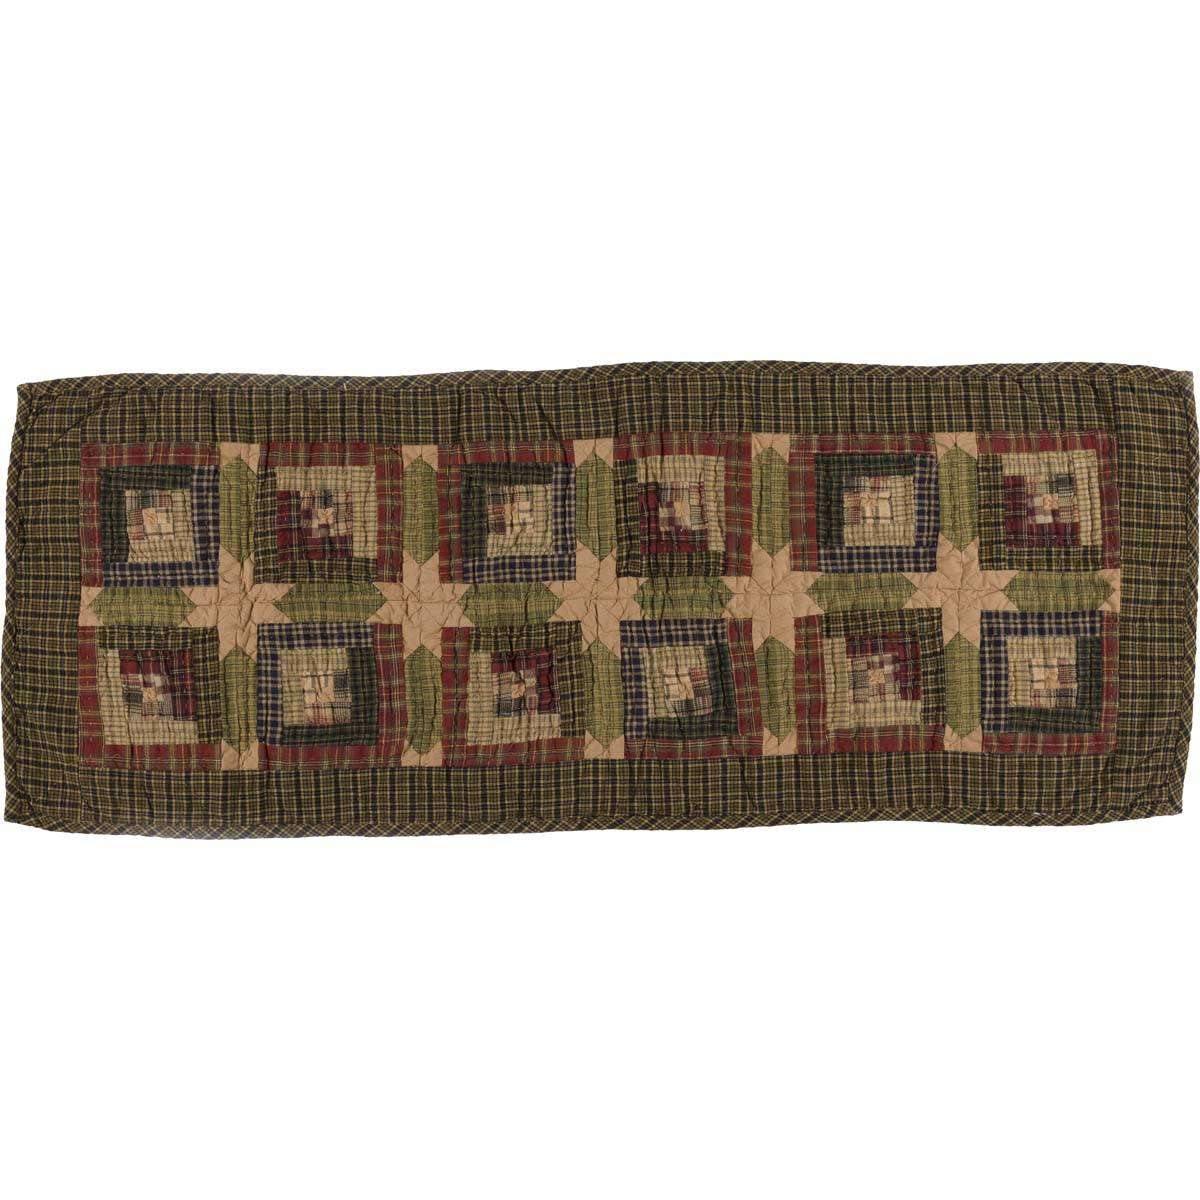 Tea Cabin Runner Quilted 13x36 VHC Brands - The Fox Decor